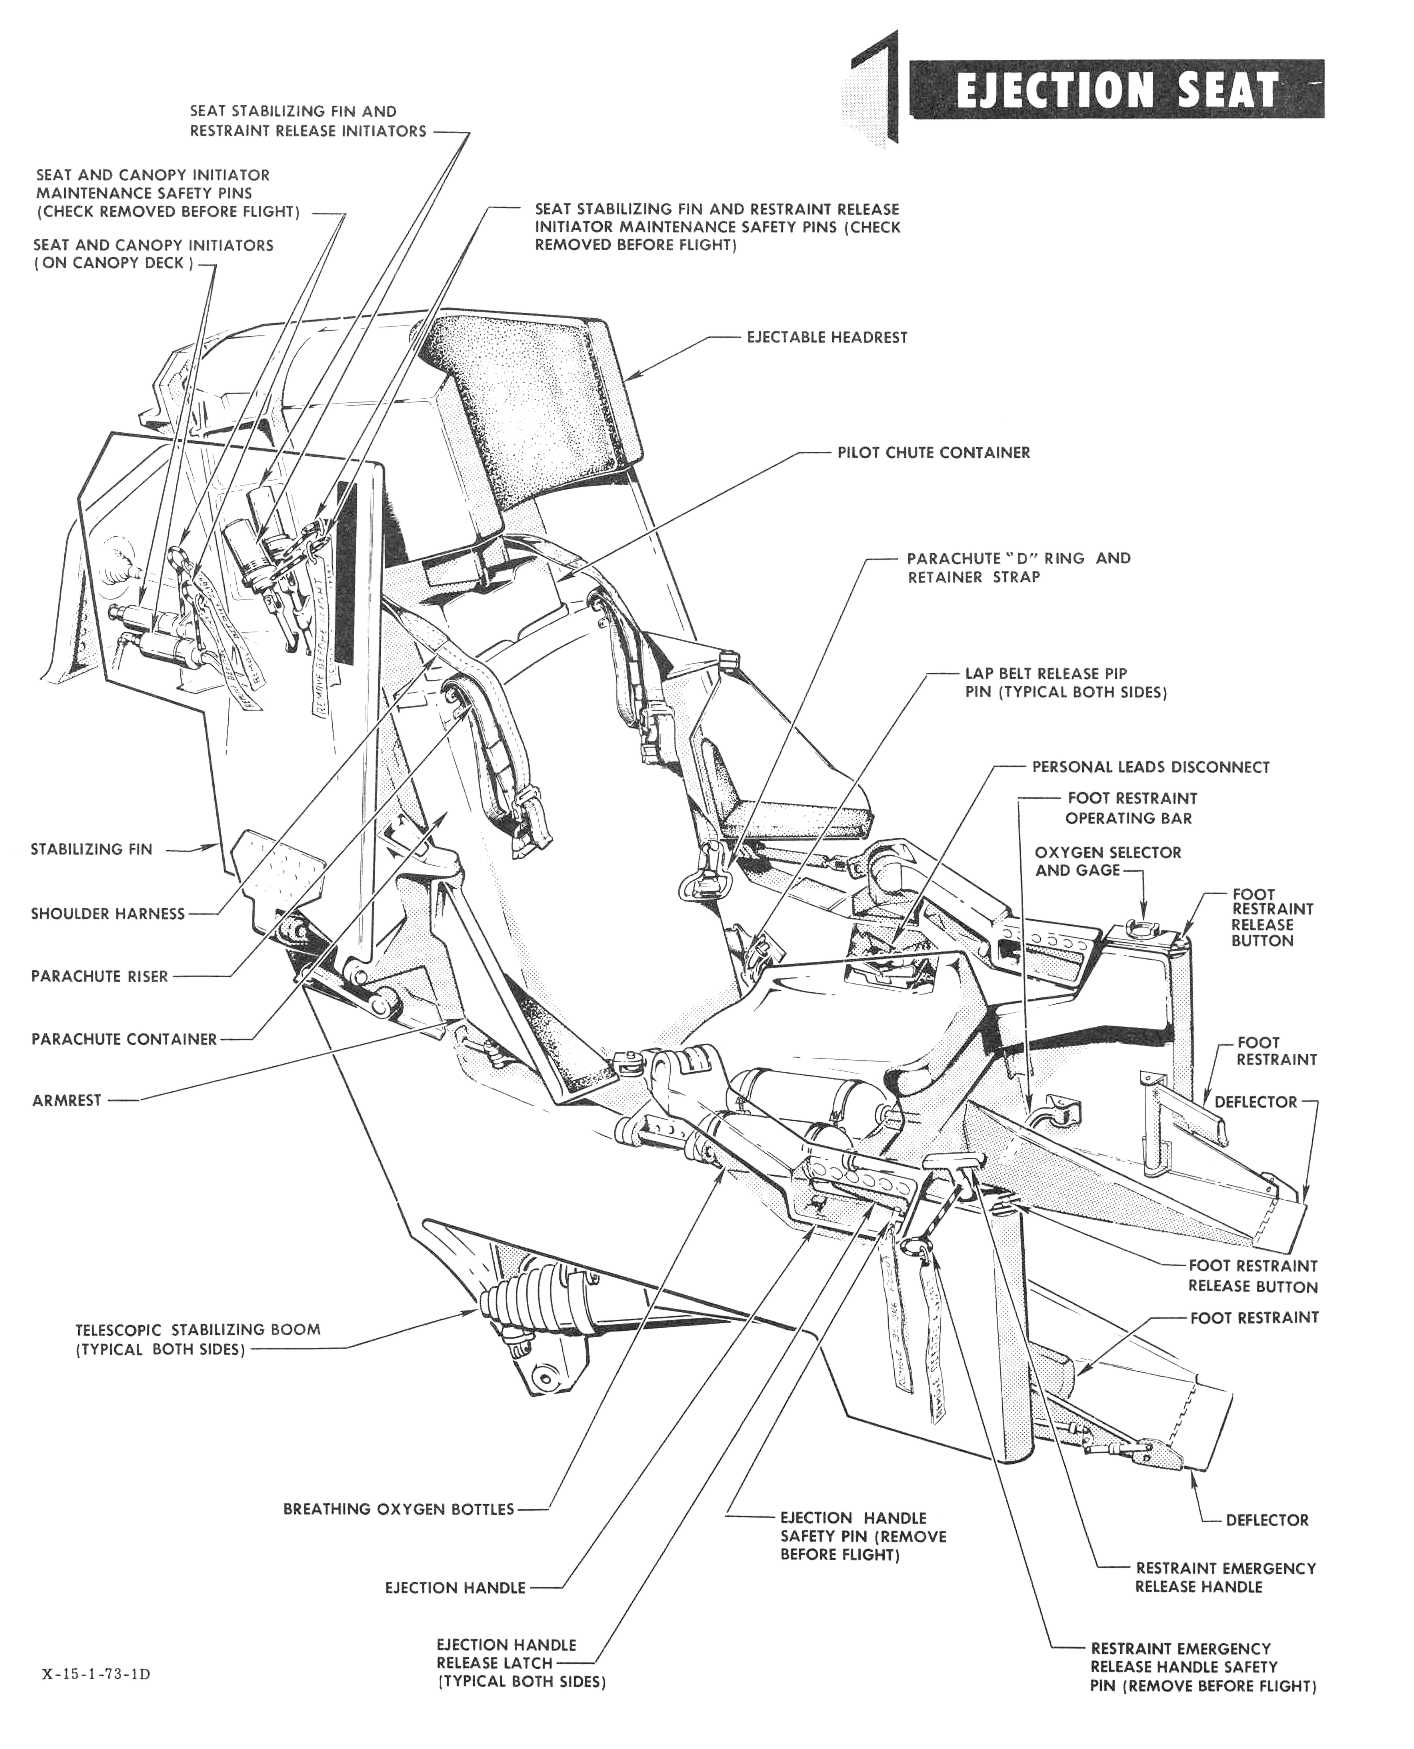 X-15 ejection seat